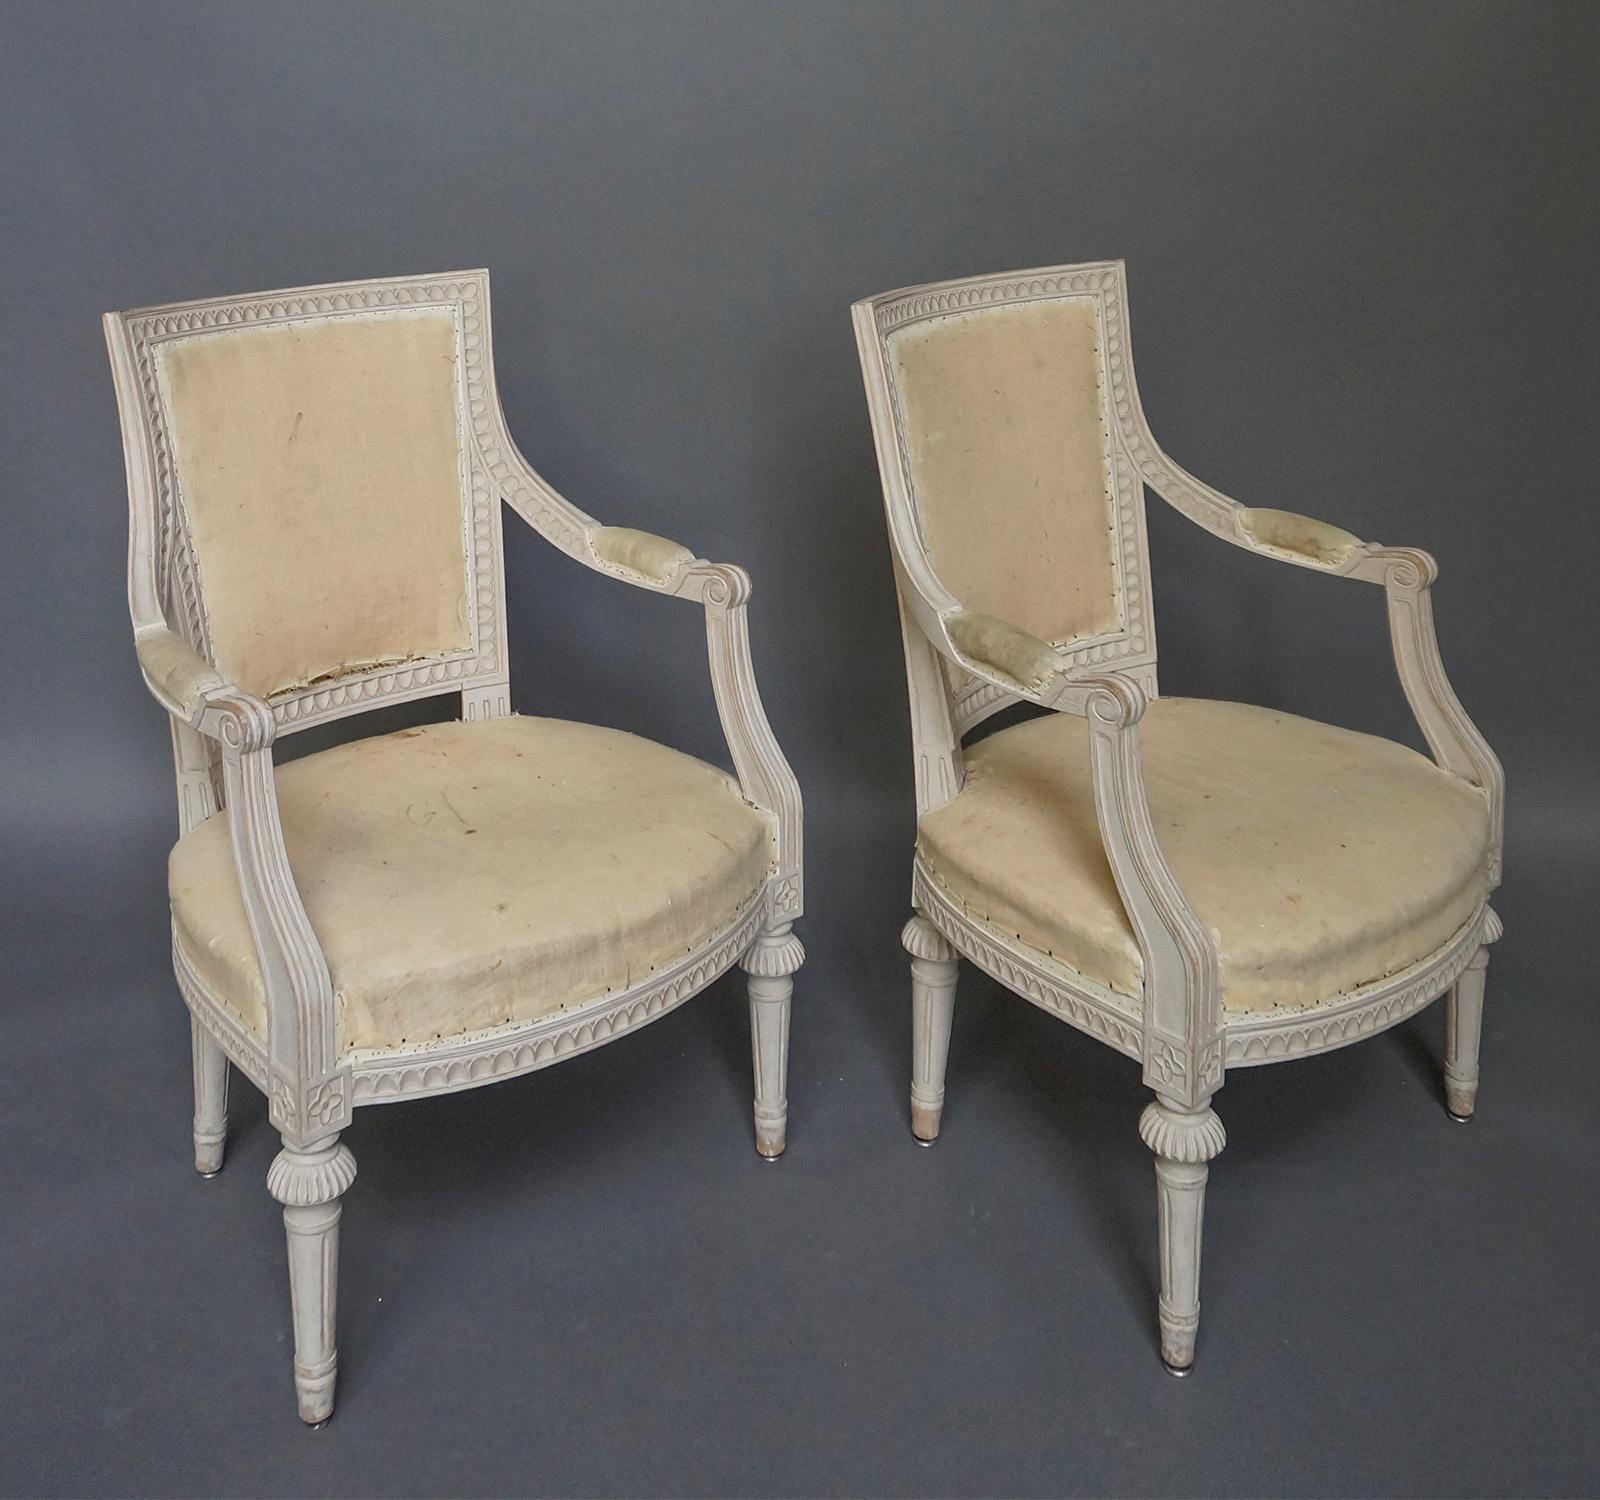 Pair of armchairs, Sweden, circa 1910, in the Gustavian style. The upholstered backs and seats are surrounded with lambs tongue molding which extends on to the curving armrests. Round, tapering legs. Sturdy and quite comfortable.